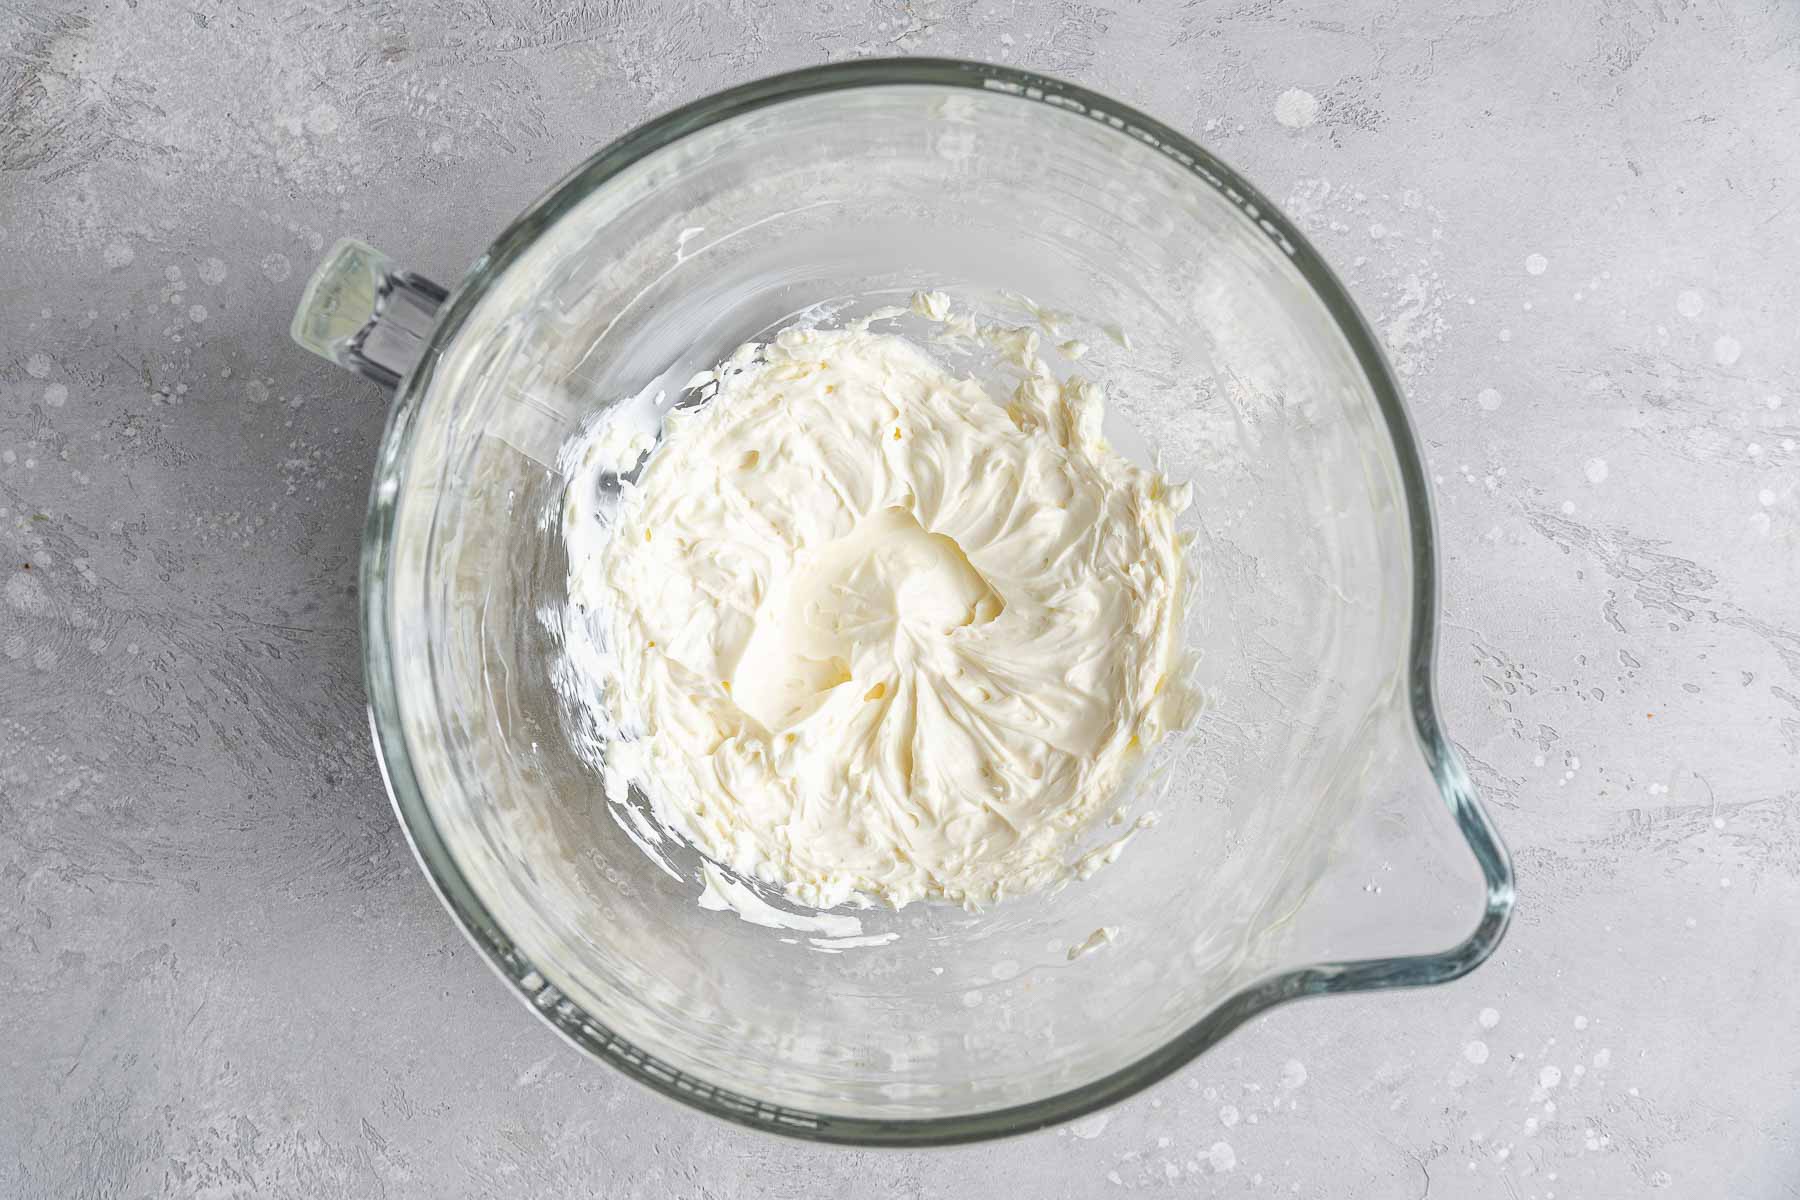 Cream cheese beating in a stand mixer bowl.